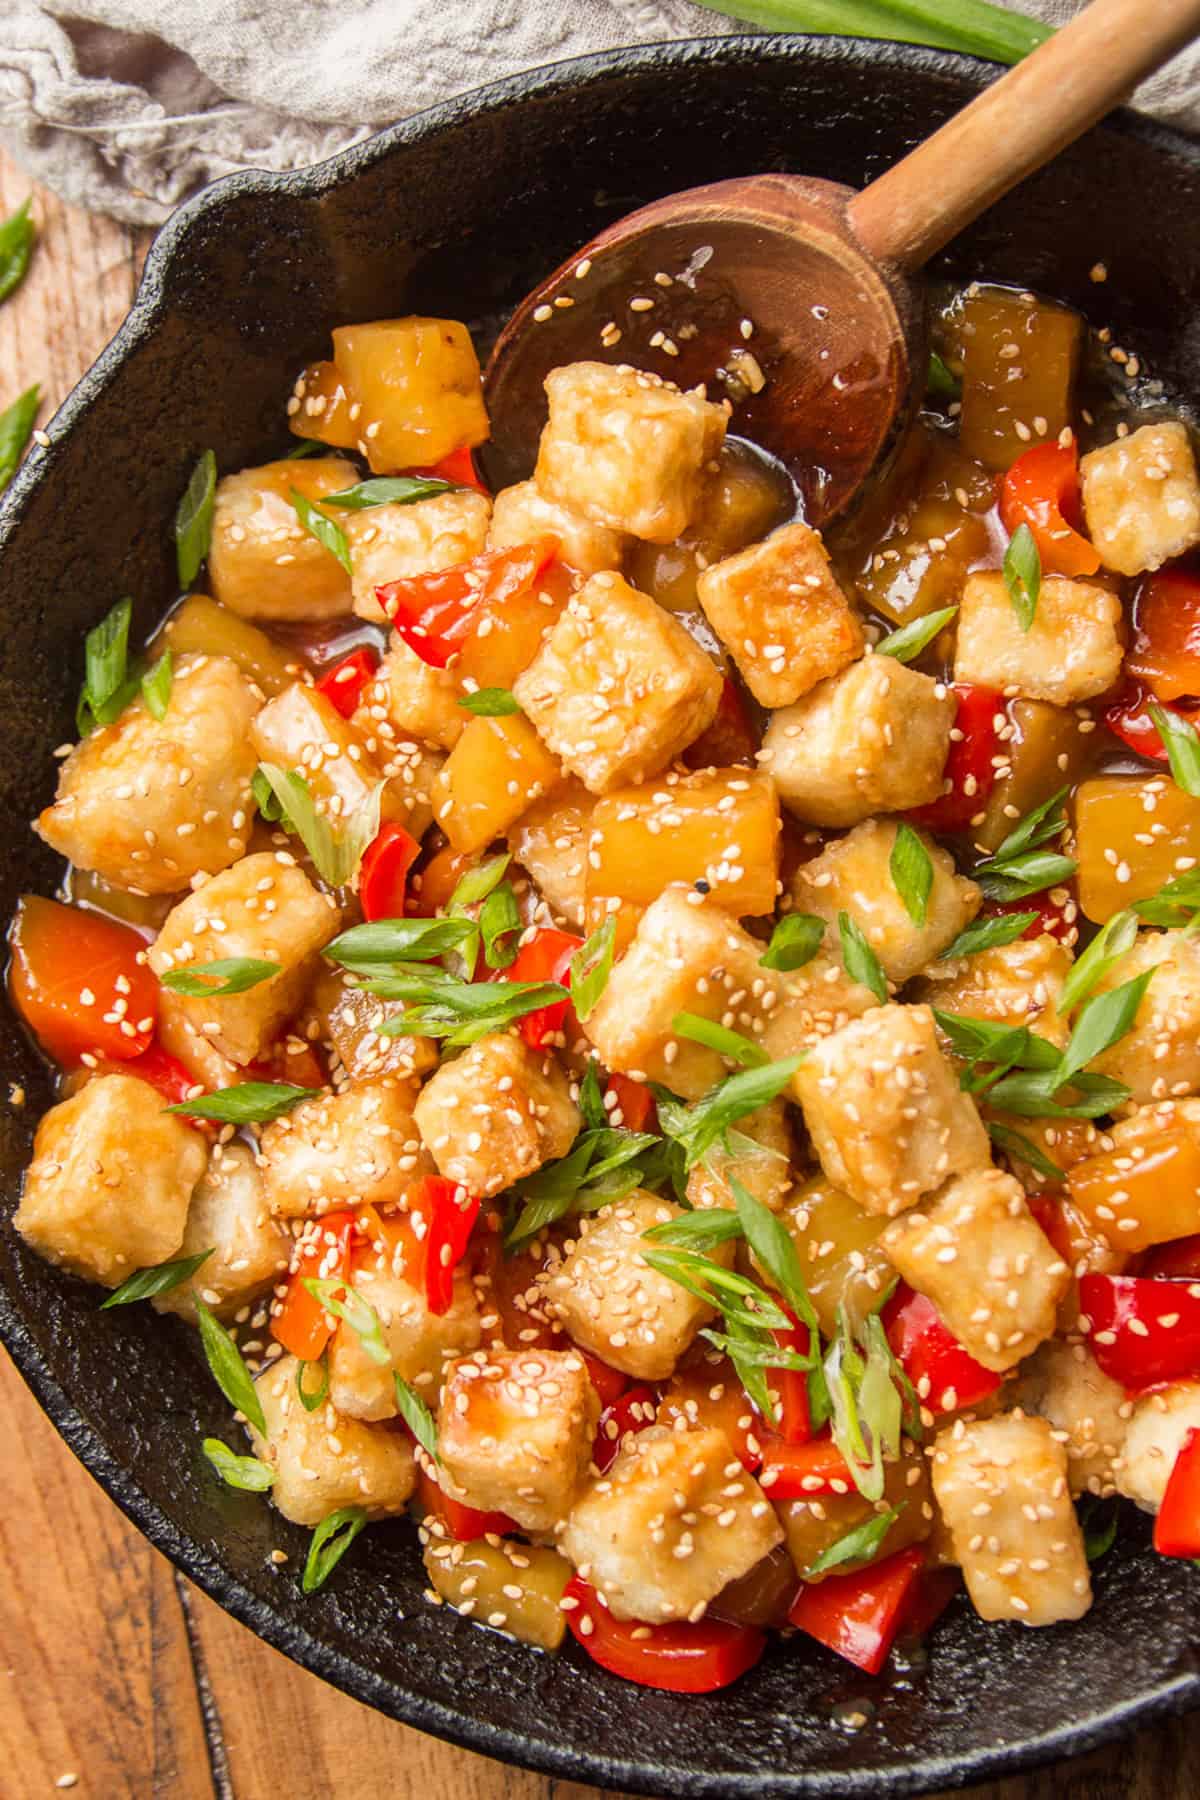 Skillet of Sweet & Sour Tofu with a wooden spoon.